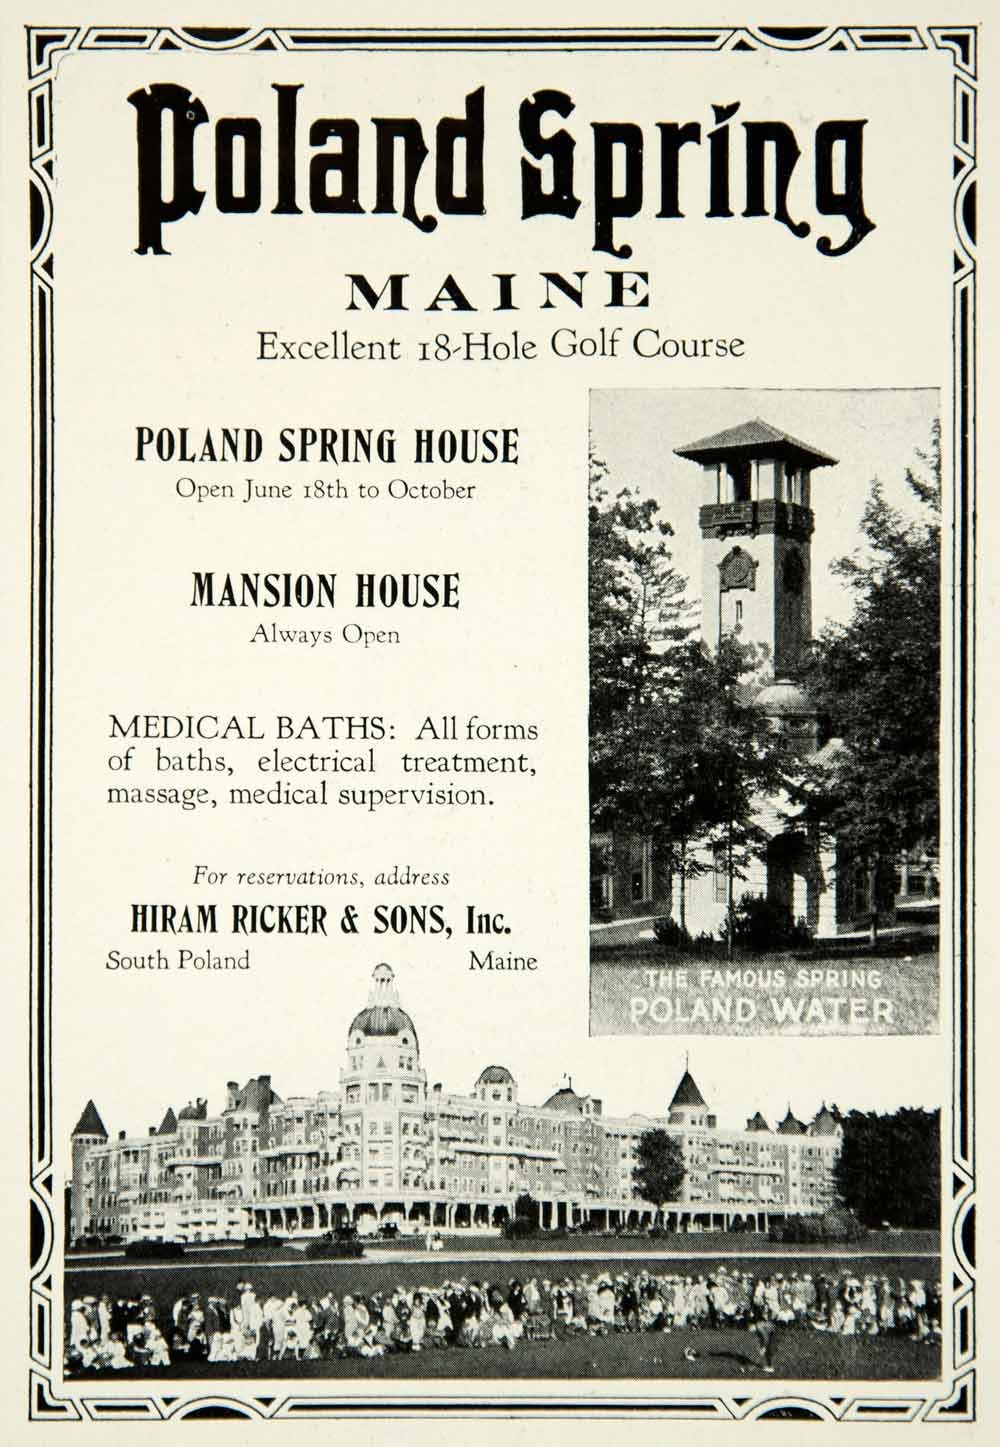 1924 Ad South Poland Spring Maine 18 Hole Golf Course Mansion House Hotel YTS2